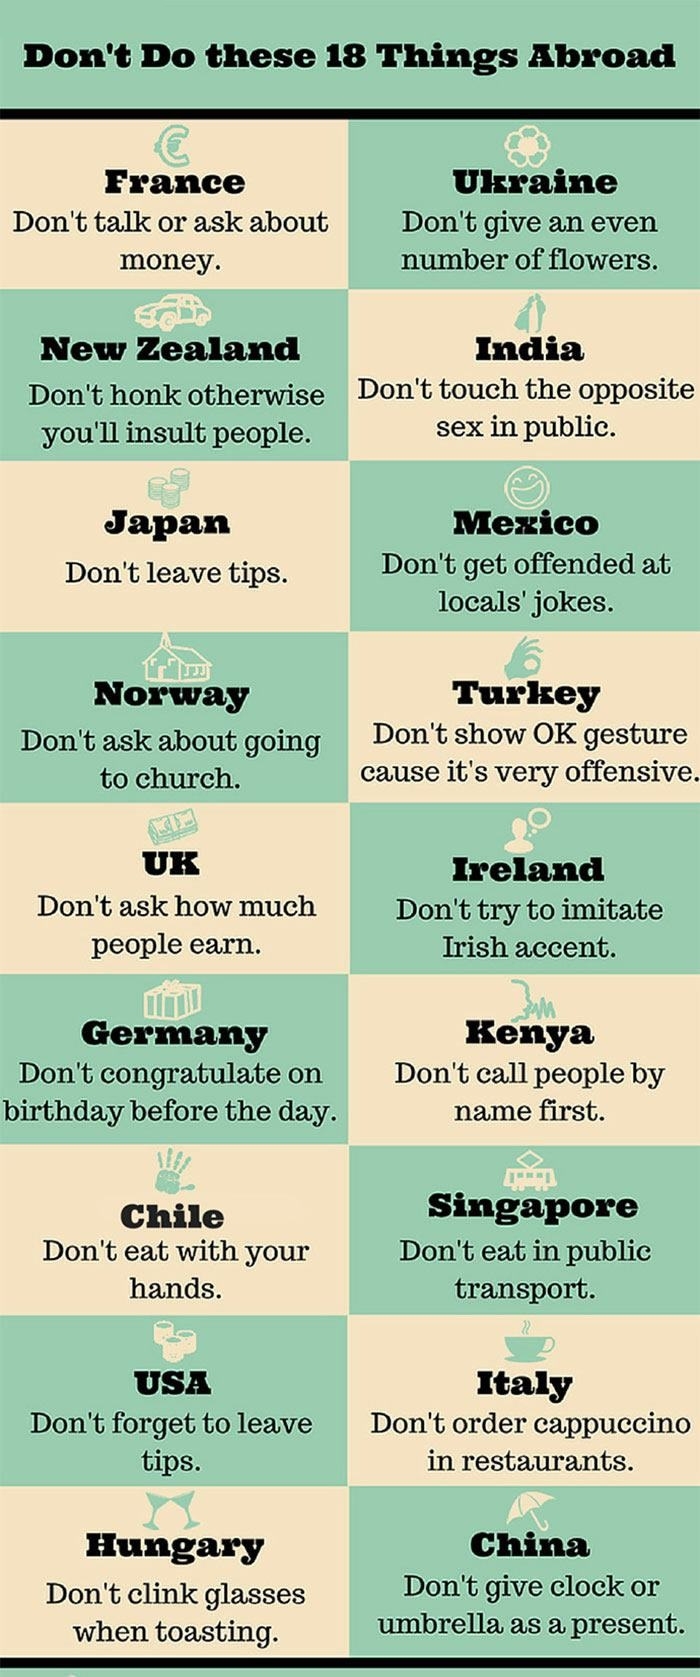 Don't do these abroad